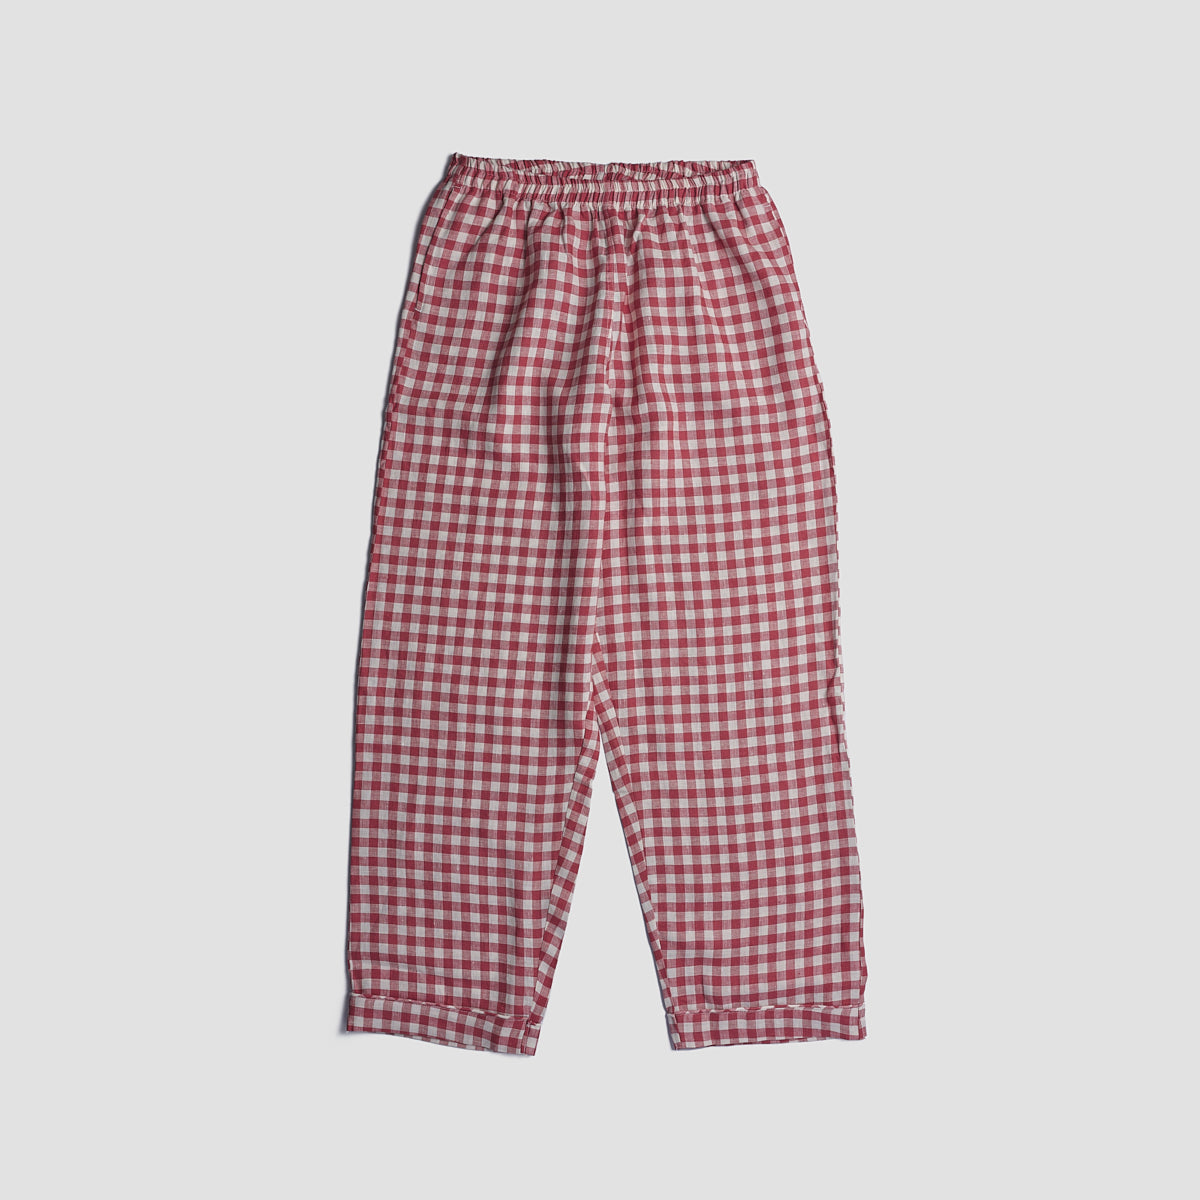 Men's Mineral Red Gingham Pyjama Trousers